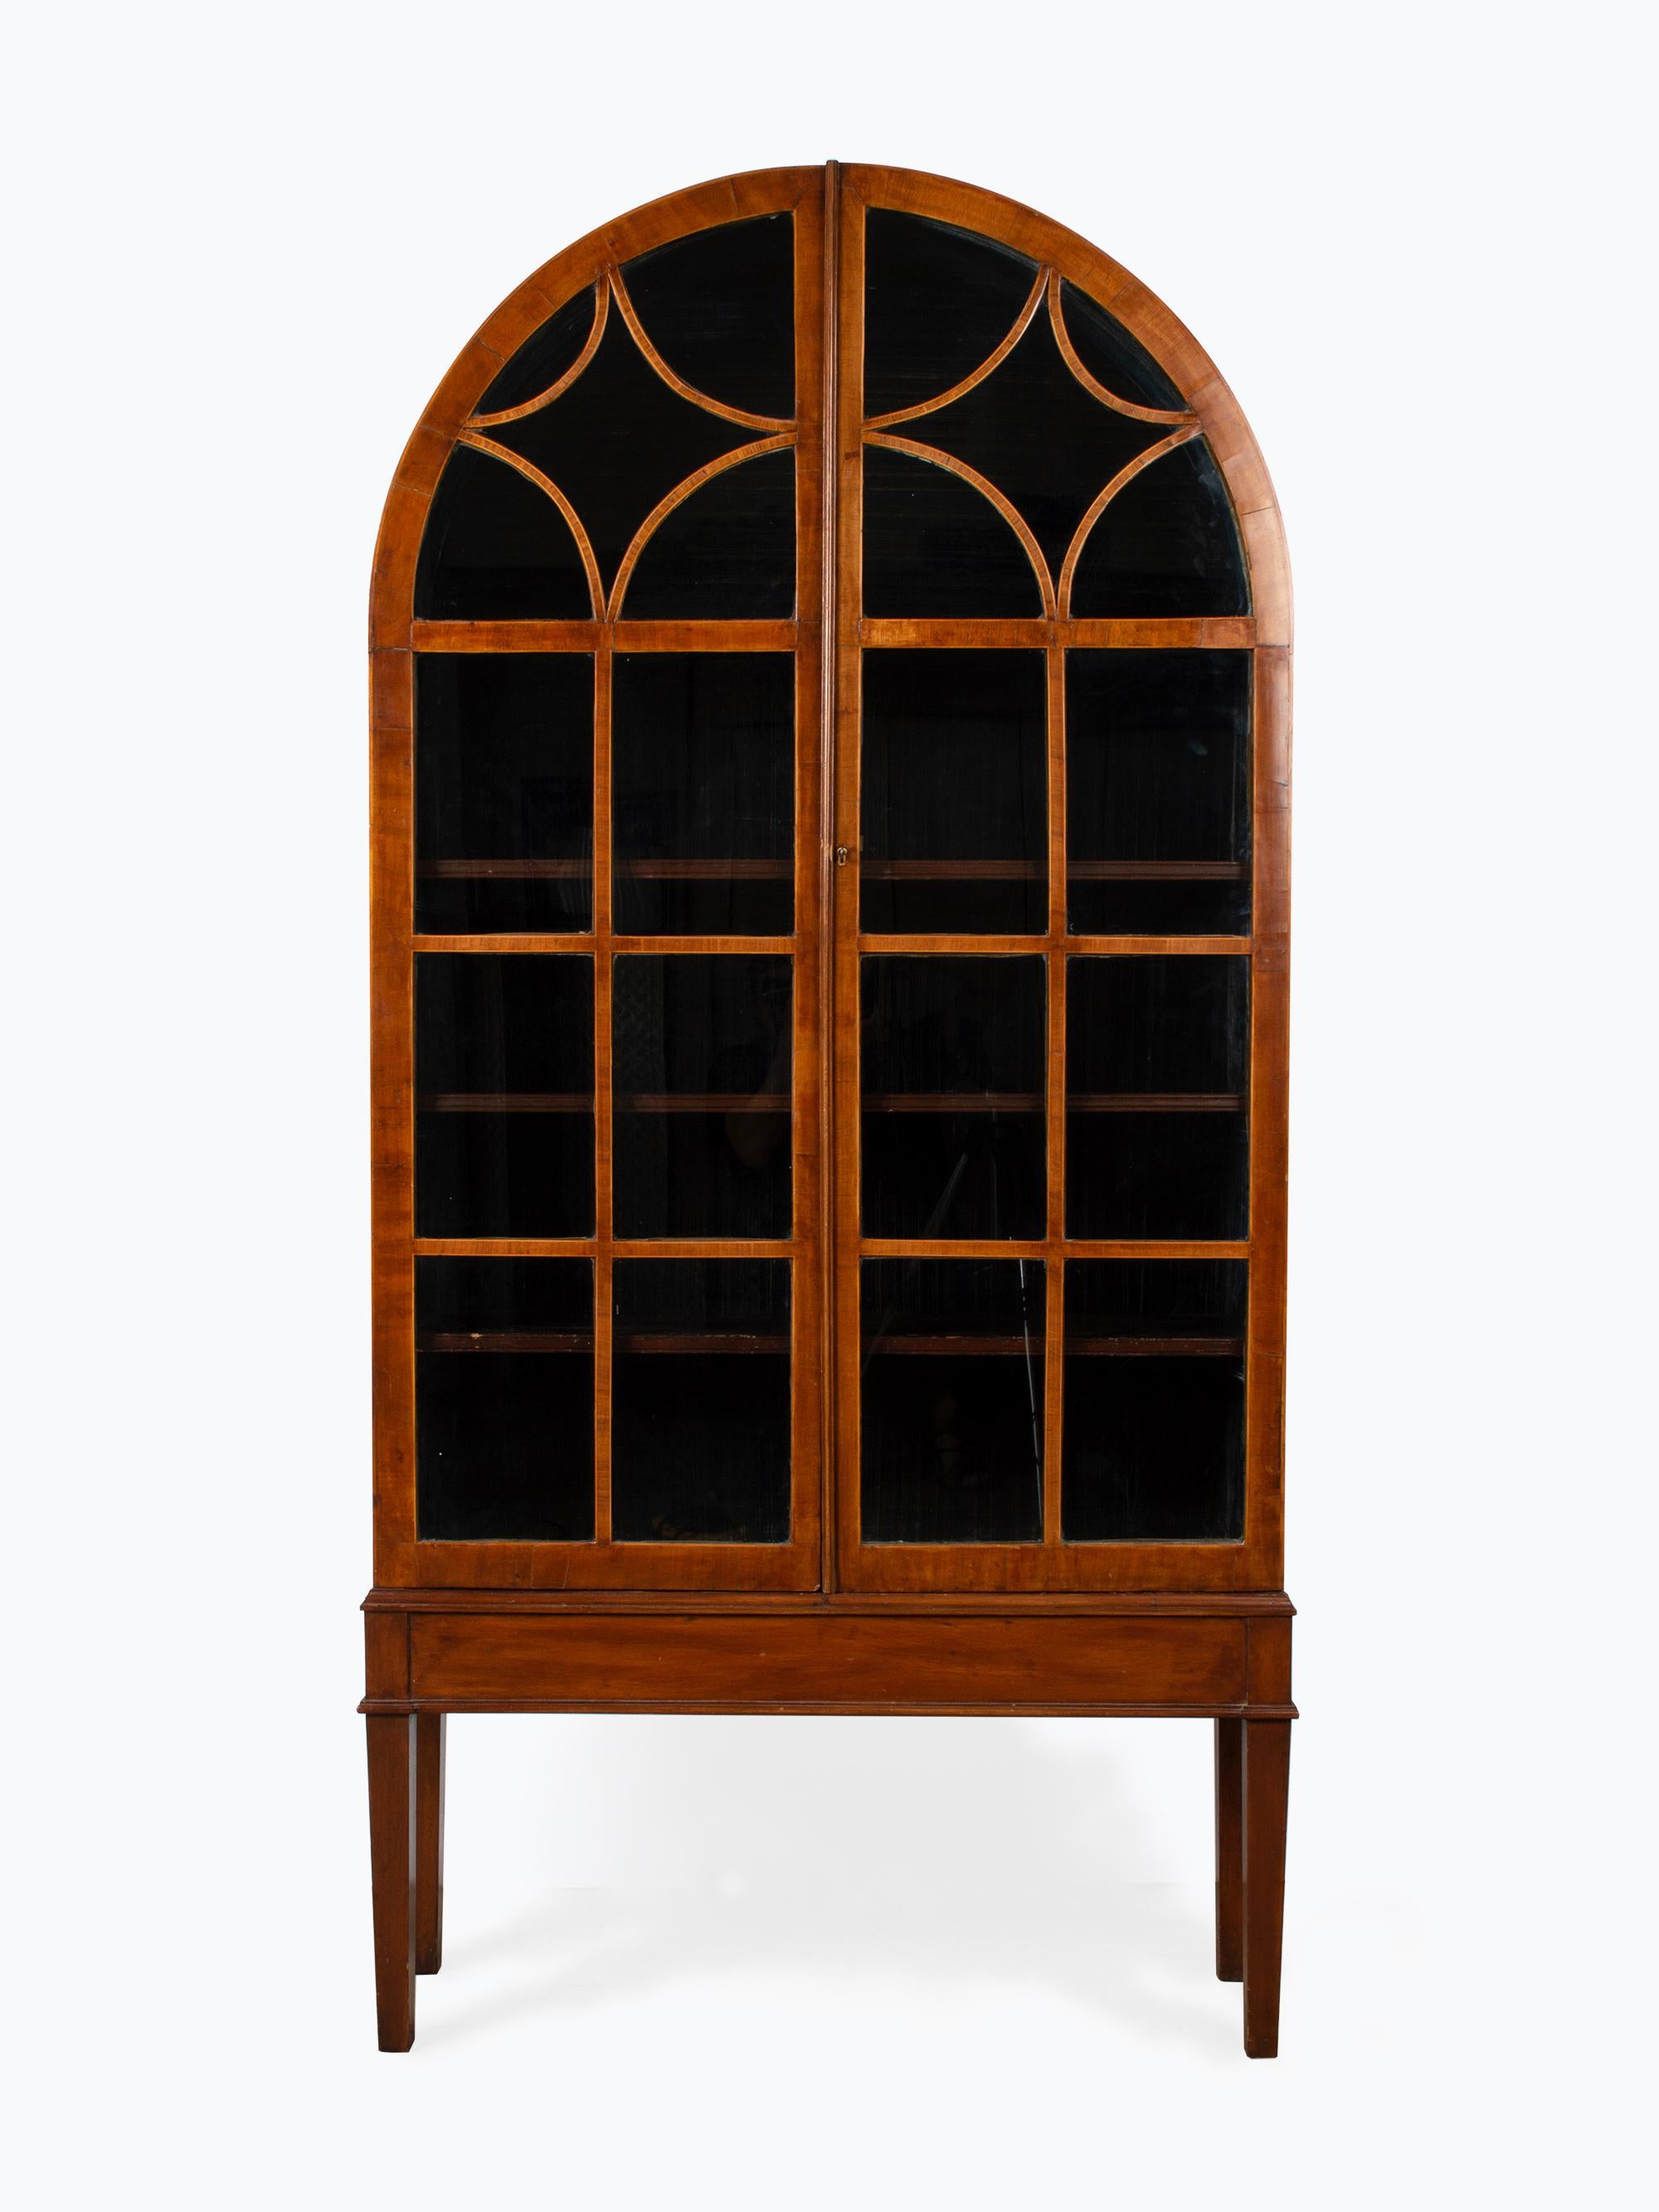 Attractive dome shaped astragal glazed cabinet in the manner of English designer and architect Robert Adam.
In excellent vintage condition commensurate of age.